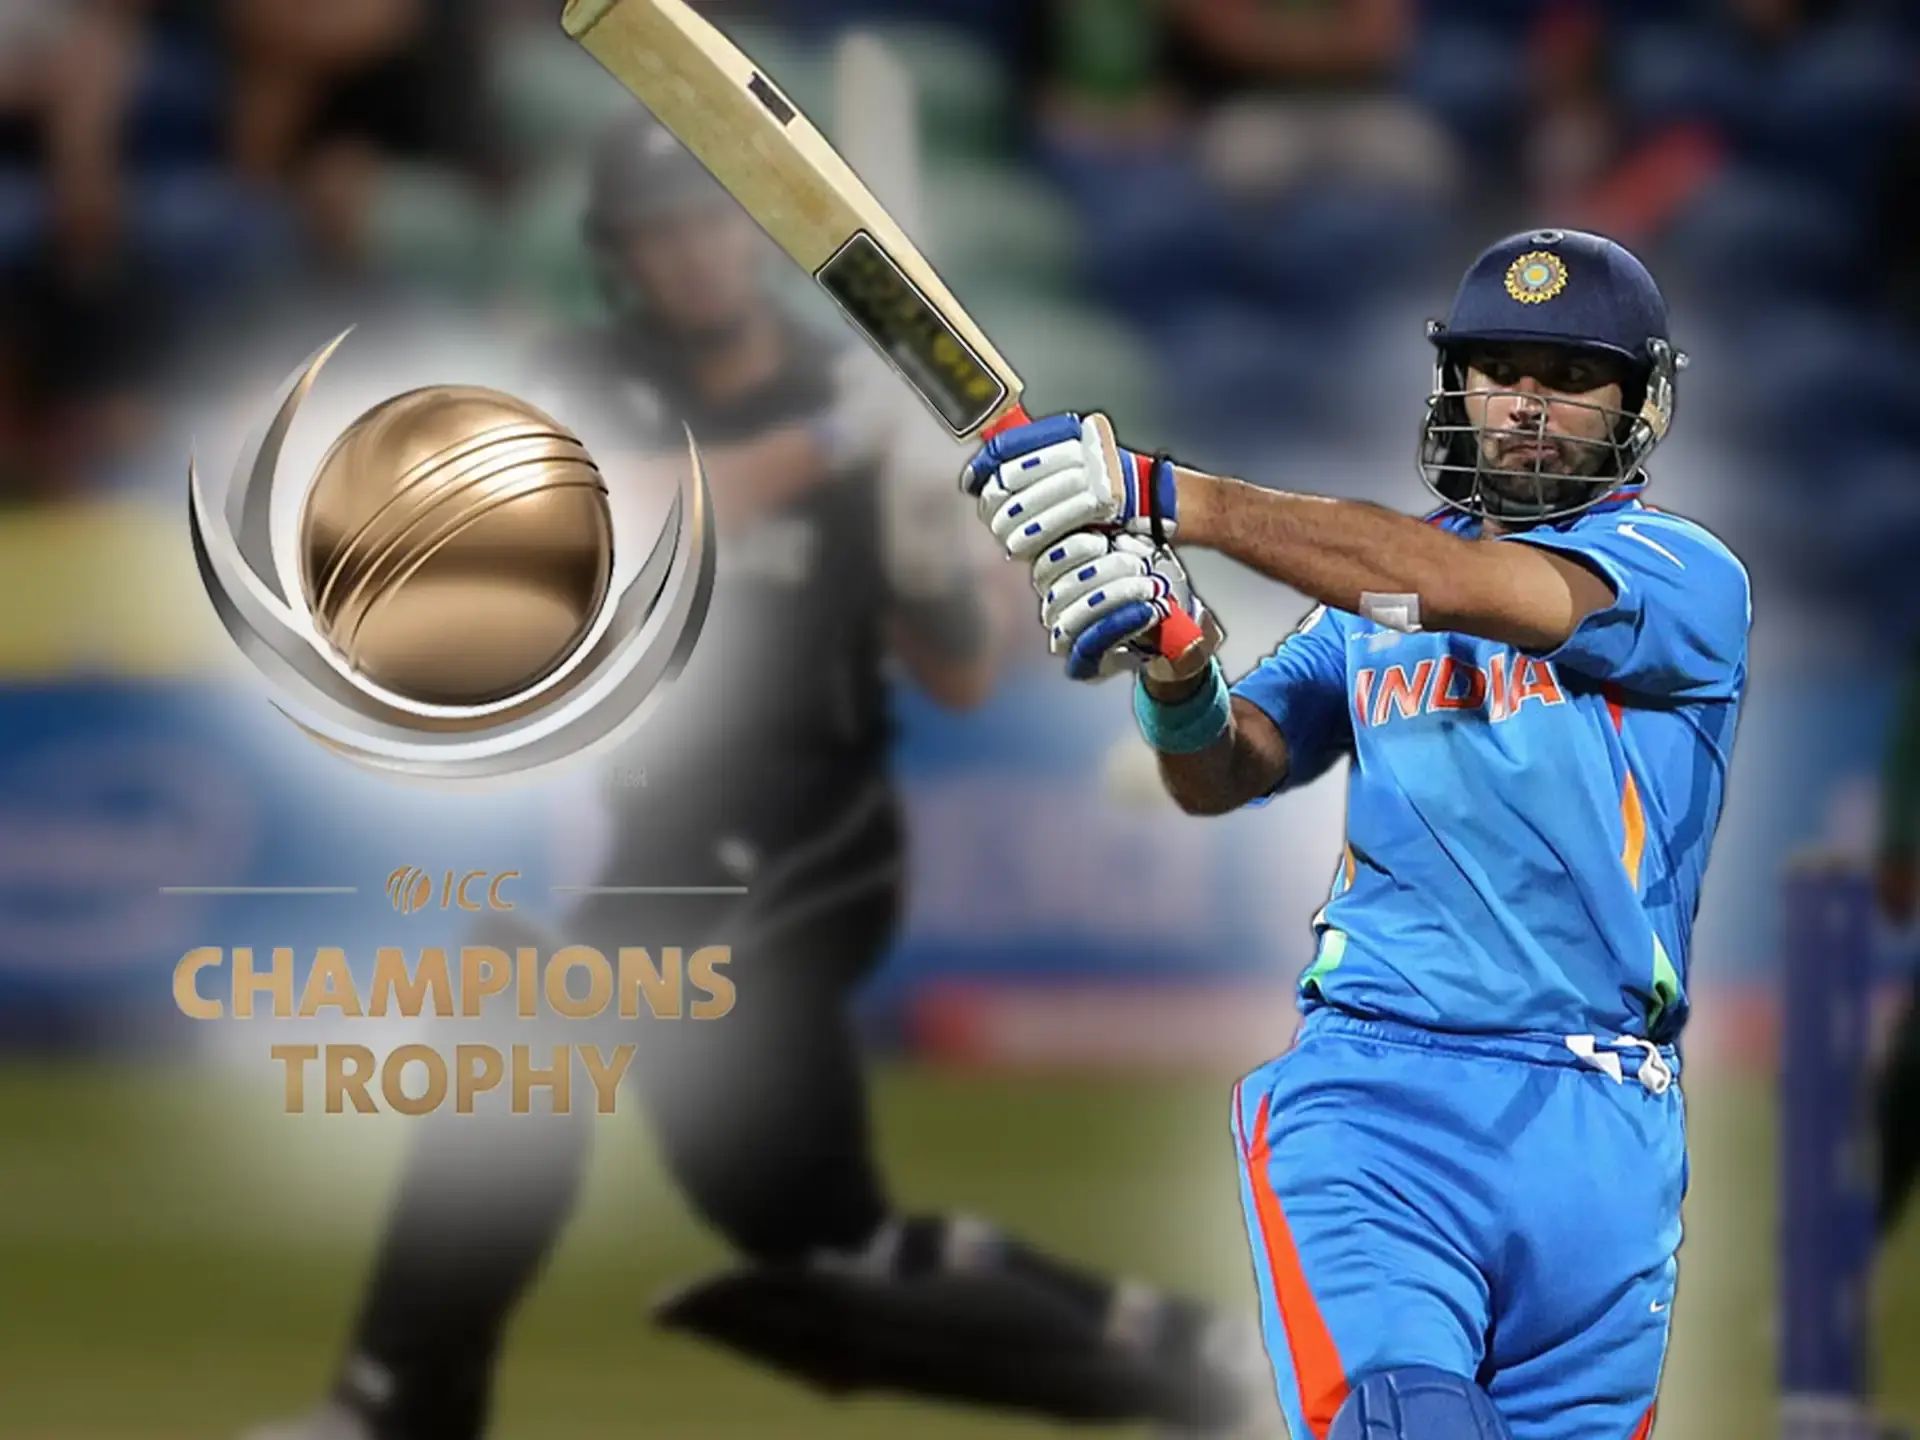 The ICC Champions Trophy is held every four years and you can bet on this event.